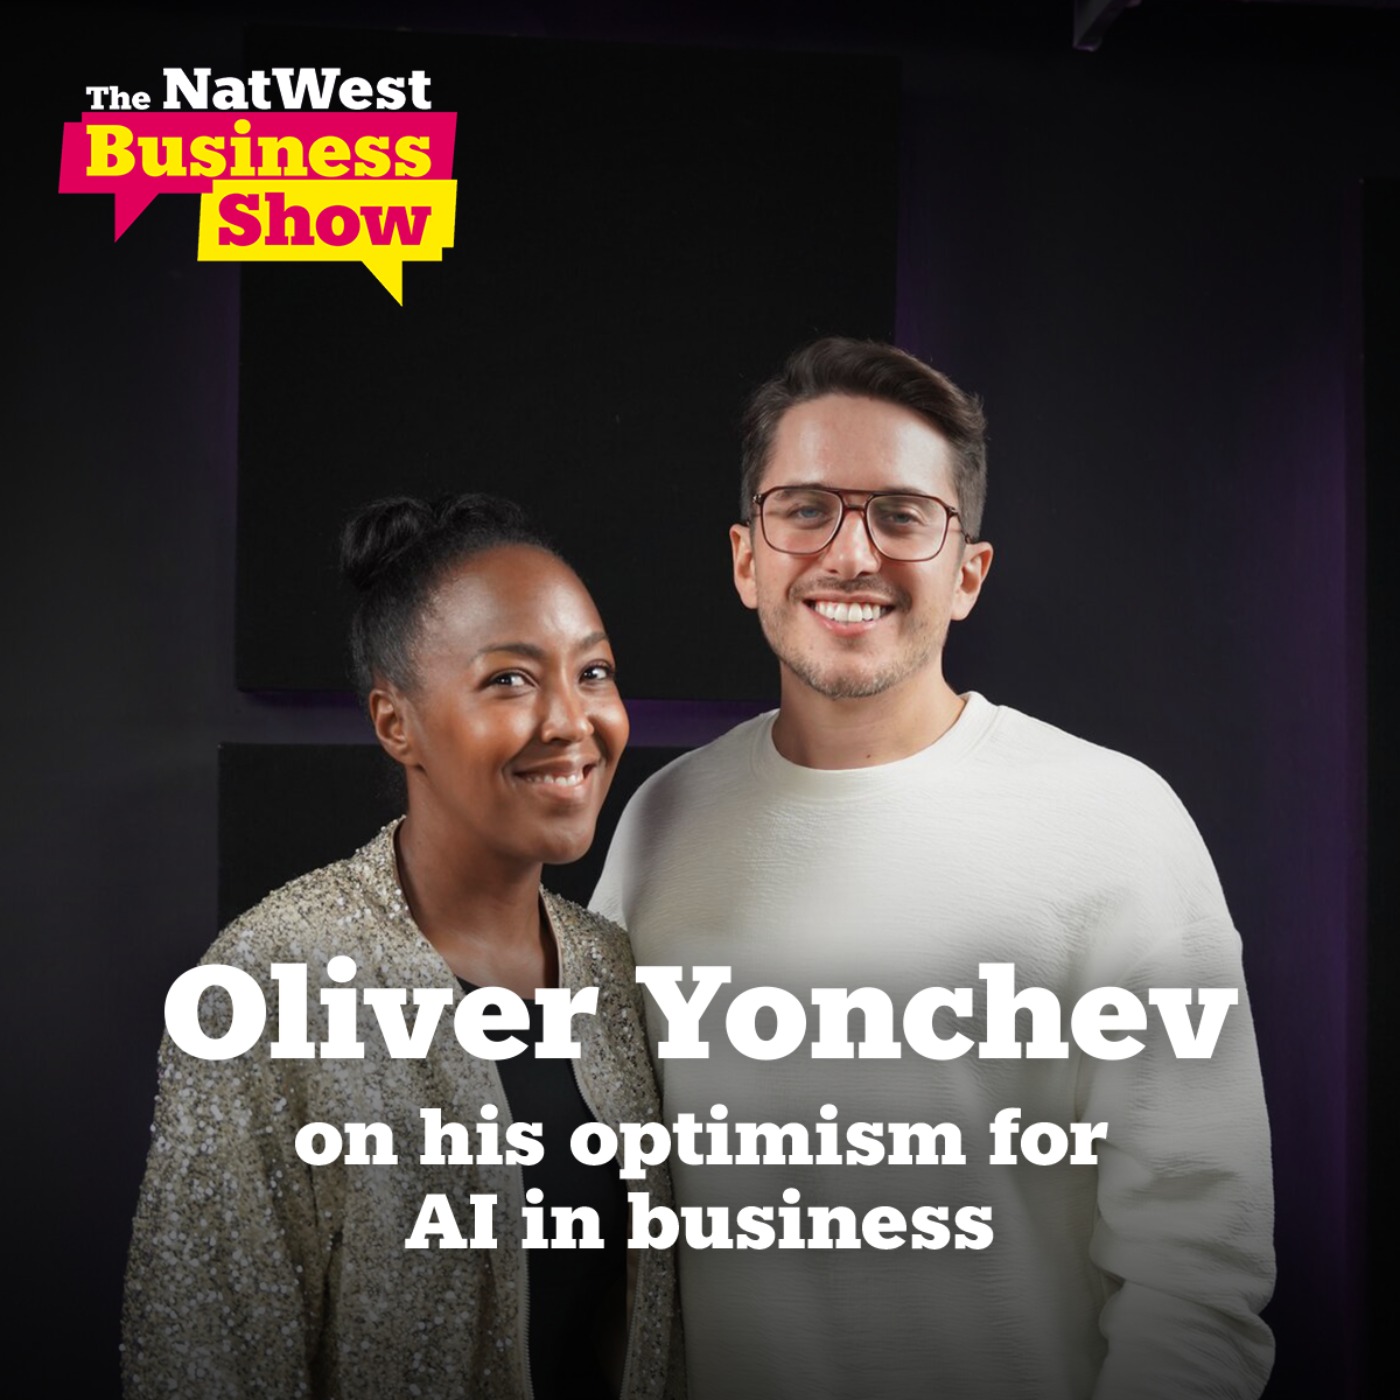 The NatWest Business Show: Oliver Yonchev on his optimism for AI in business